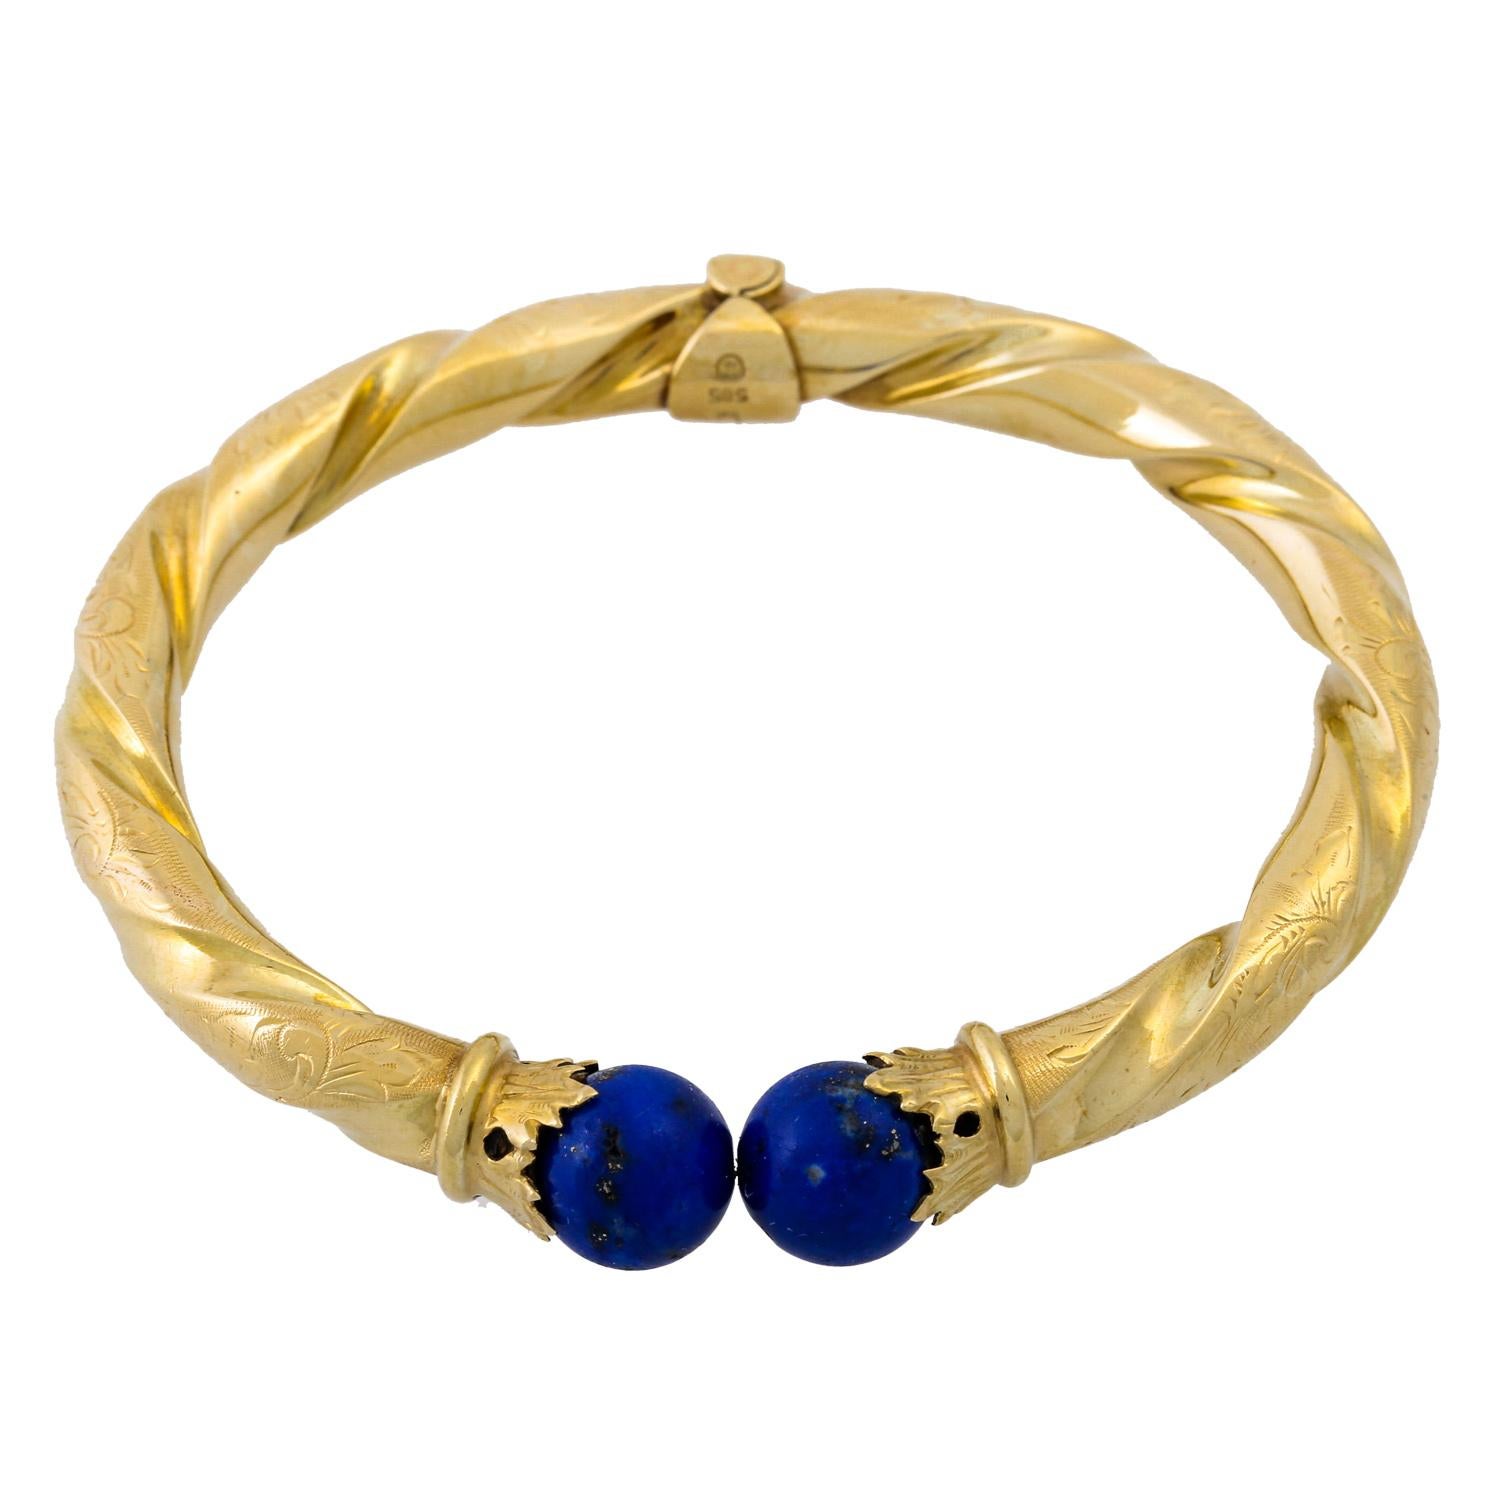 Balls 10/9 mm, GG 14K, 39.7 g, cord design with floral engravings, 20th century, strong signs of wear.

 Jewelery set bangle and brooch with lapis lazuli beads 10/9 mm, 14K yellow gold, 39.7 g, corded design with floral engravings, 20th century,